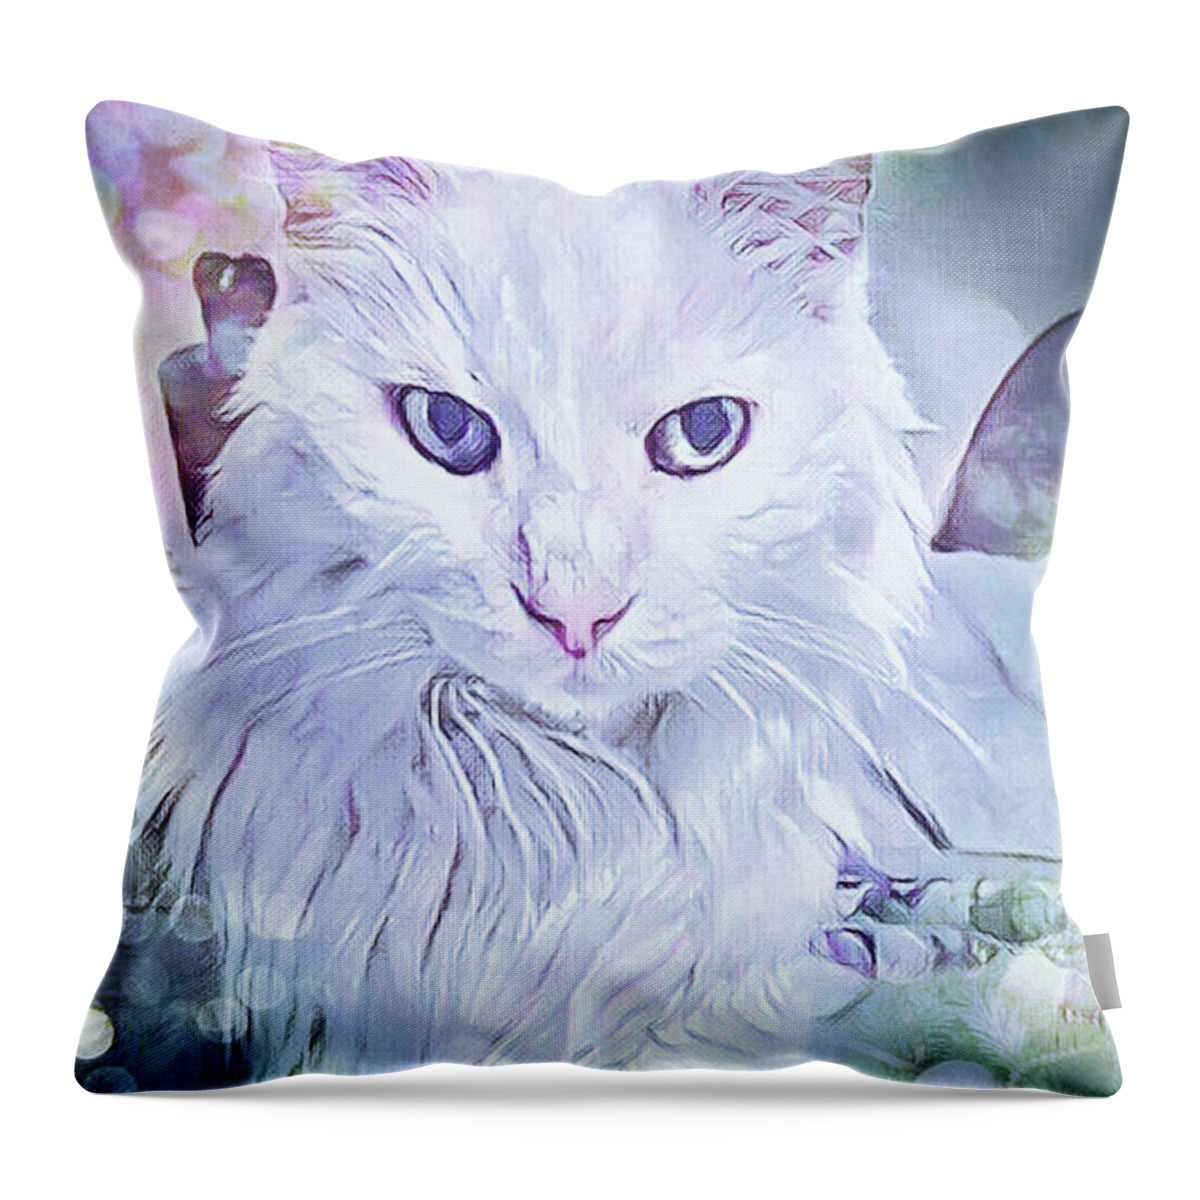 Cat; Kitten; White; White Cat; Green; Long-haired Cat; Angora; Cat Eyes; Kitten Eyes; Macro; Close-up; Photography; Portrait; Watercolor; Dreamy; Throw Pillow featuring the photograph Angora Eyes by Tina Uihlein